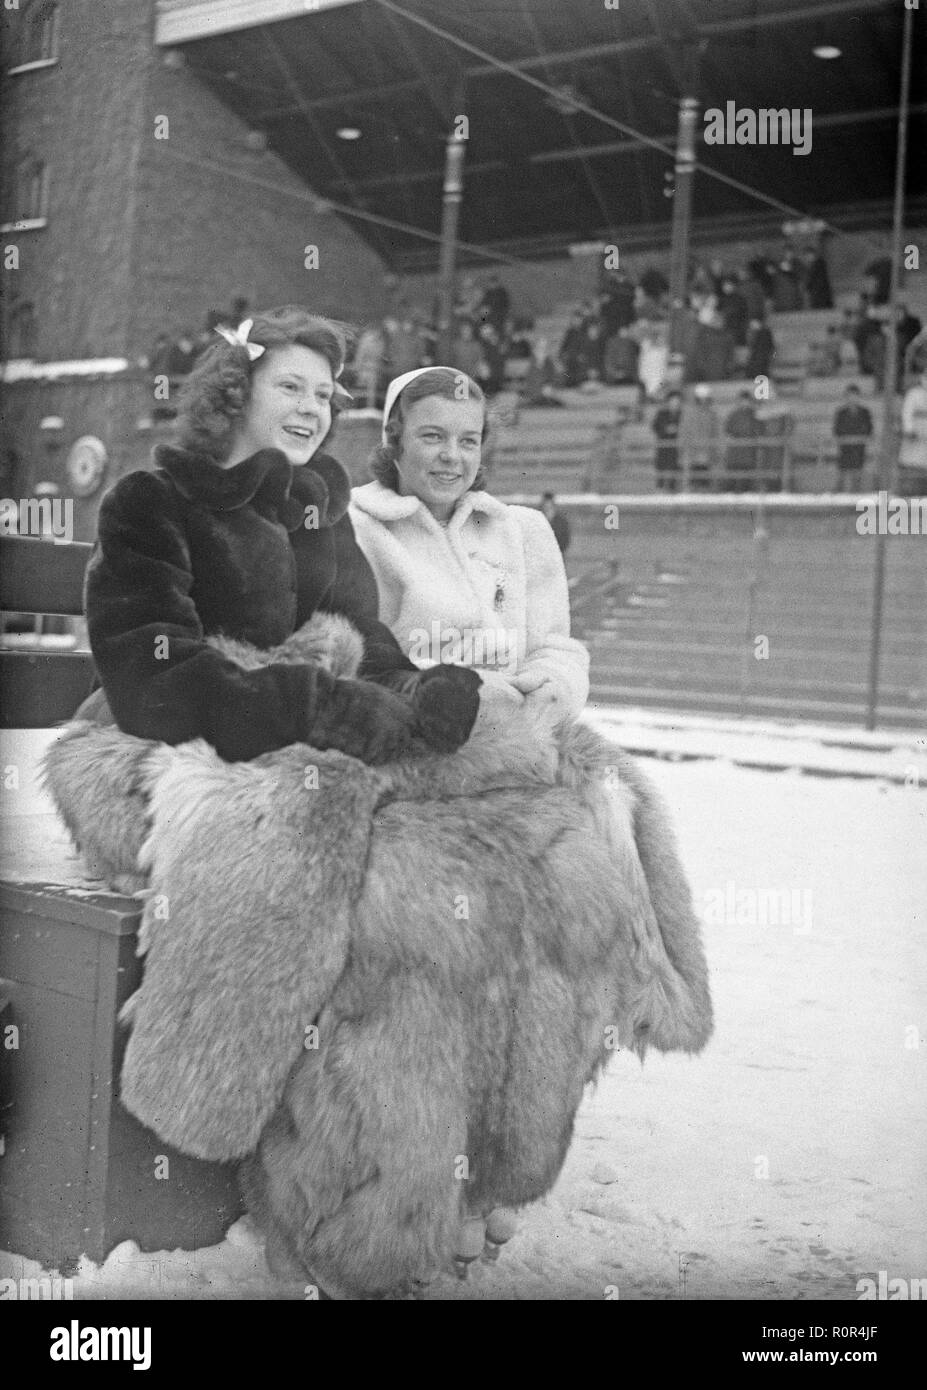 Ice skater Maj-Britt Rönningberg , 1923-2001 , swedish professional ice skater. Here on a cold winters day keeping warm under large fur coats.  Sweden February 11 1940.Photo Kristoffersson 59-1 Stock Photo